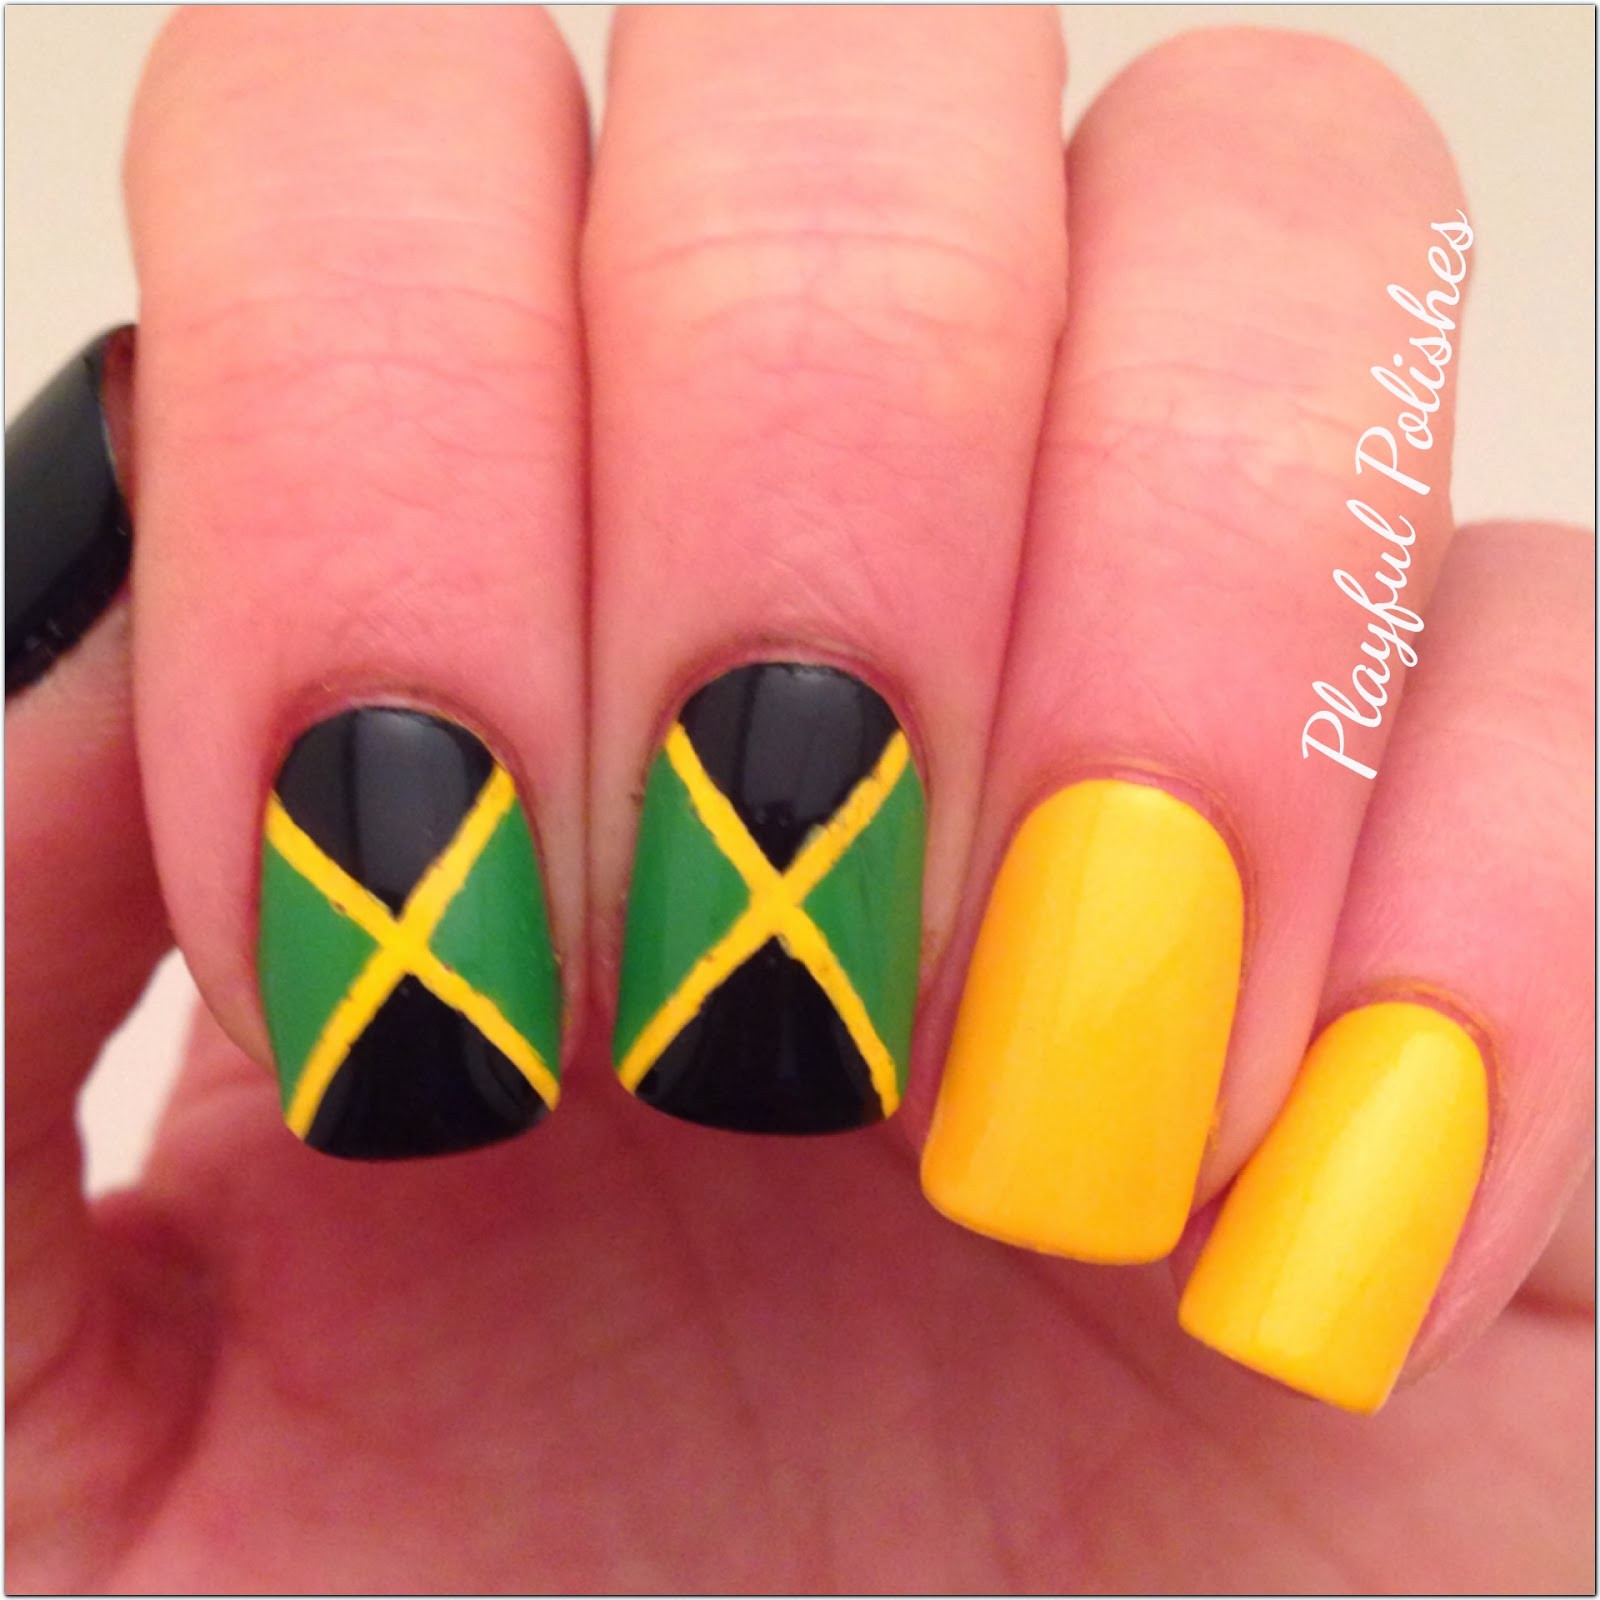 Jamaican Nail Designs
 Playful Polishes 31 DAY NAIL ART CHALLENGE INSPIRED BY A